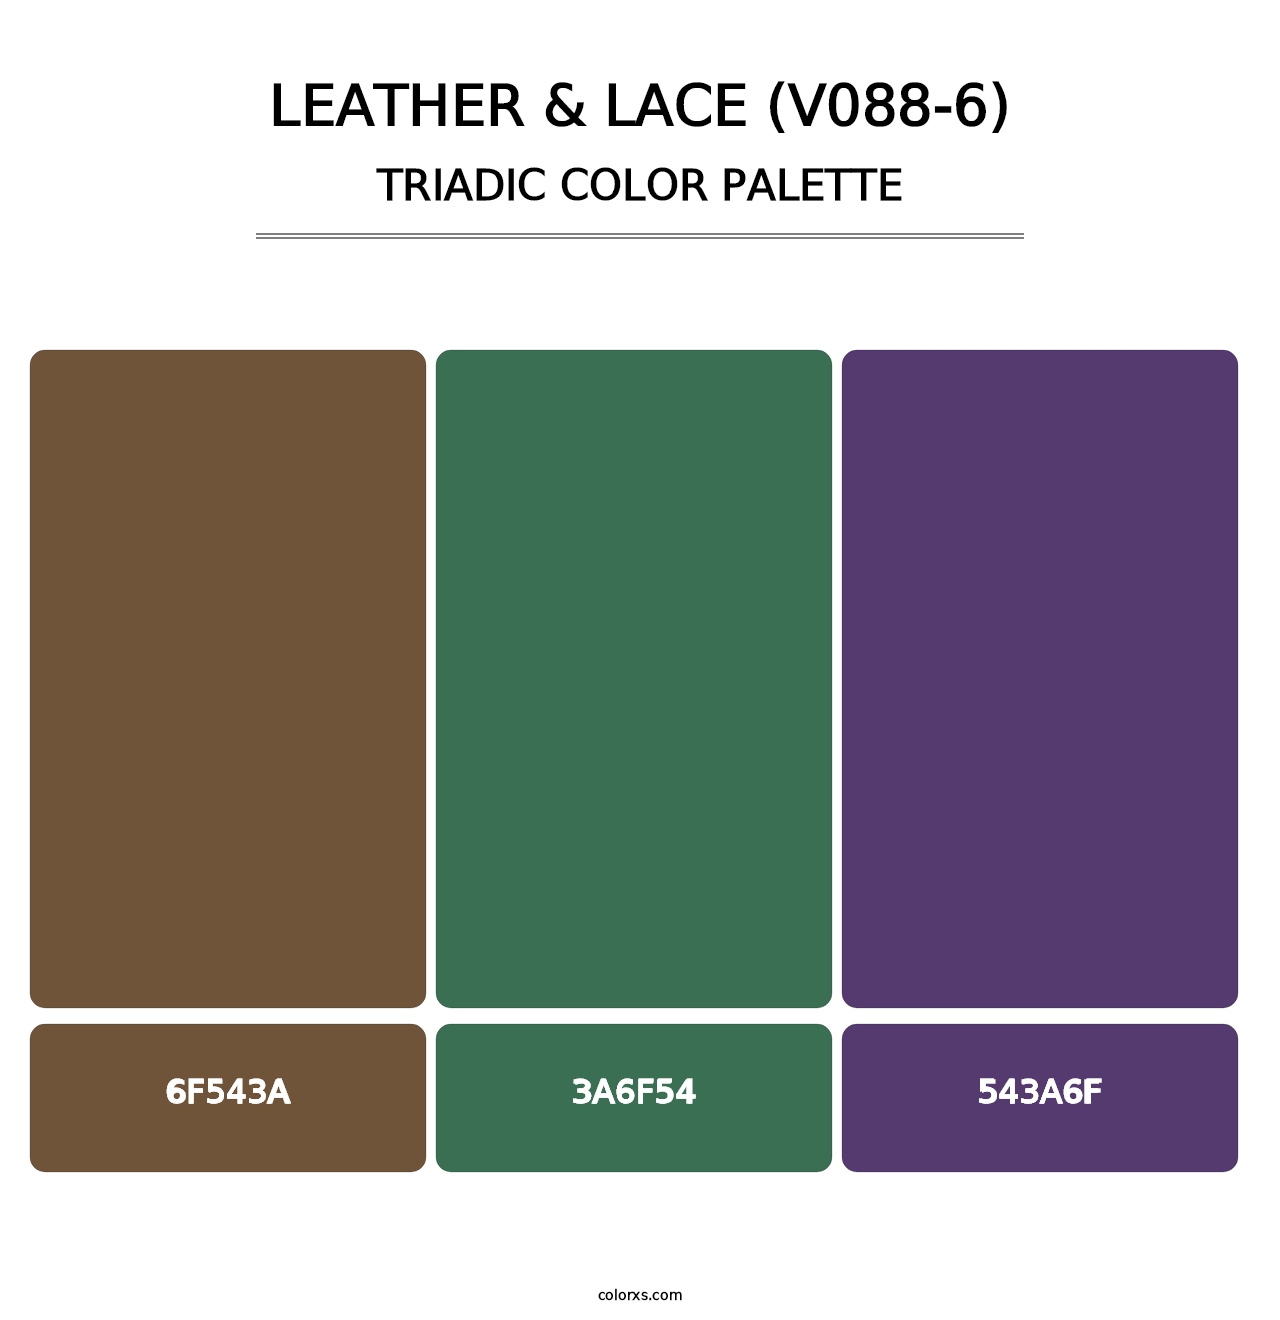 Leather & Lace (V088-6) - Triadic Color Palette